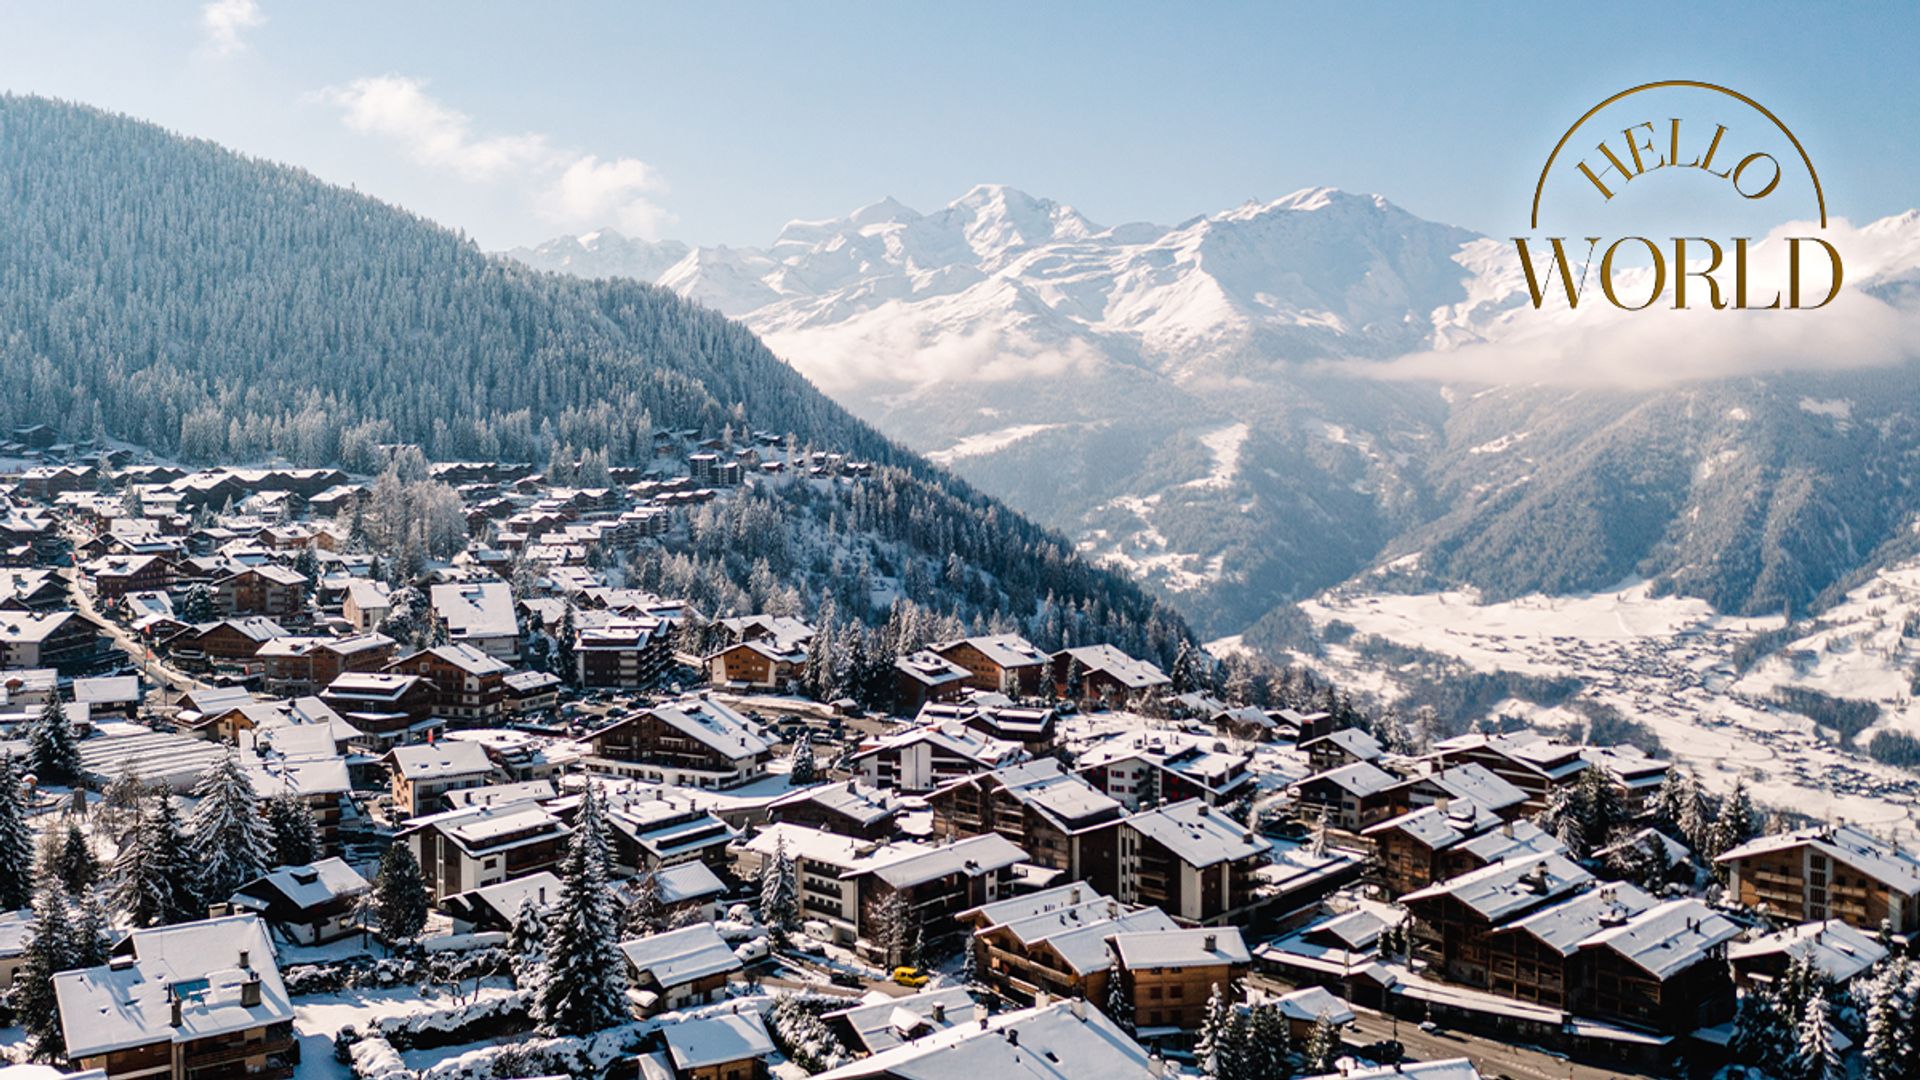 Verbier ski village with mountains in the background